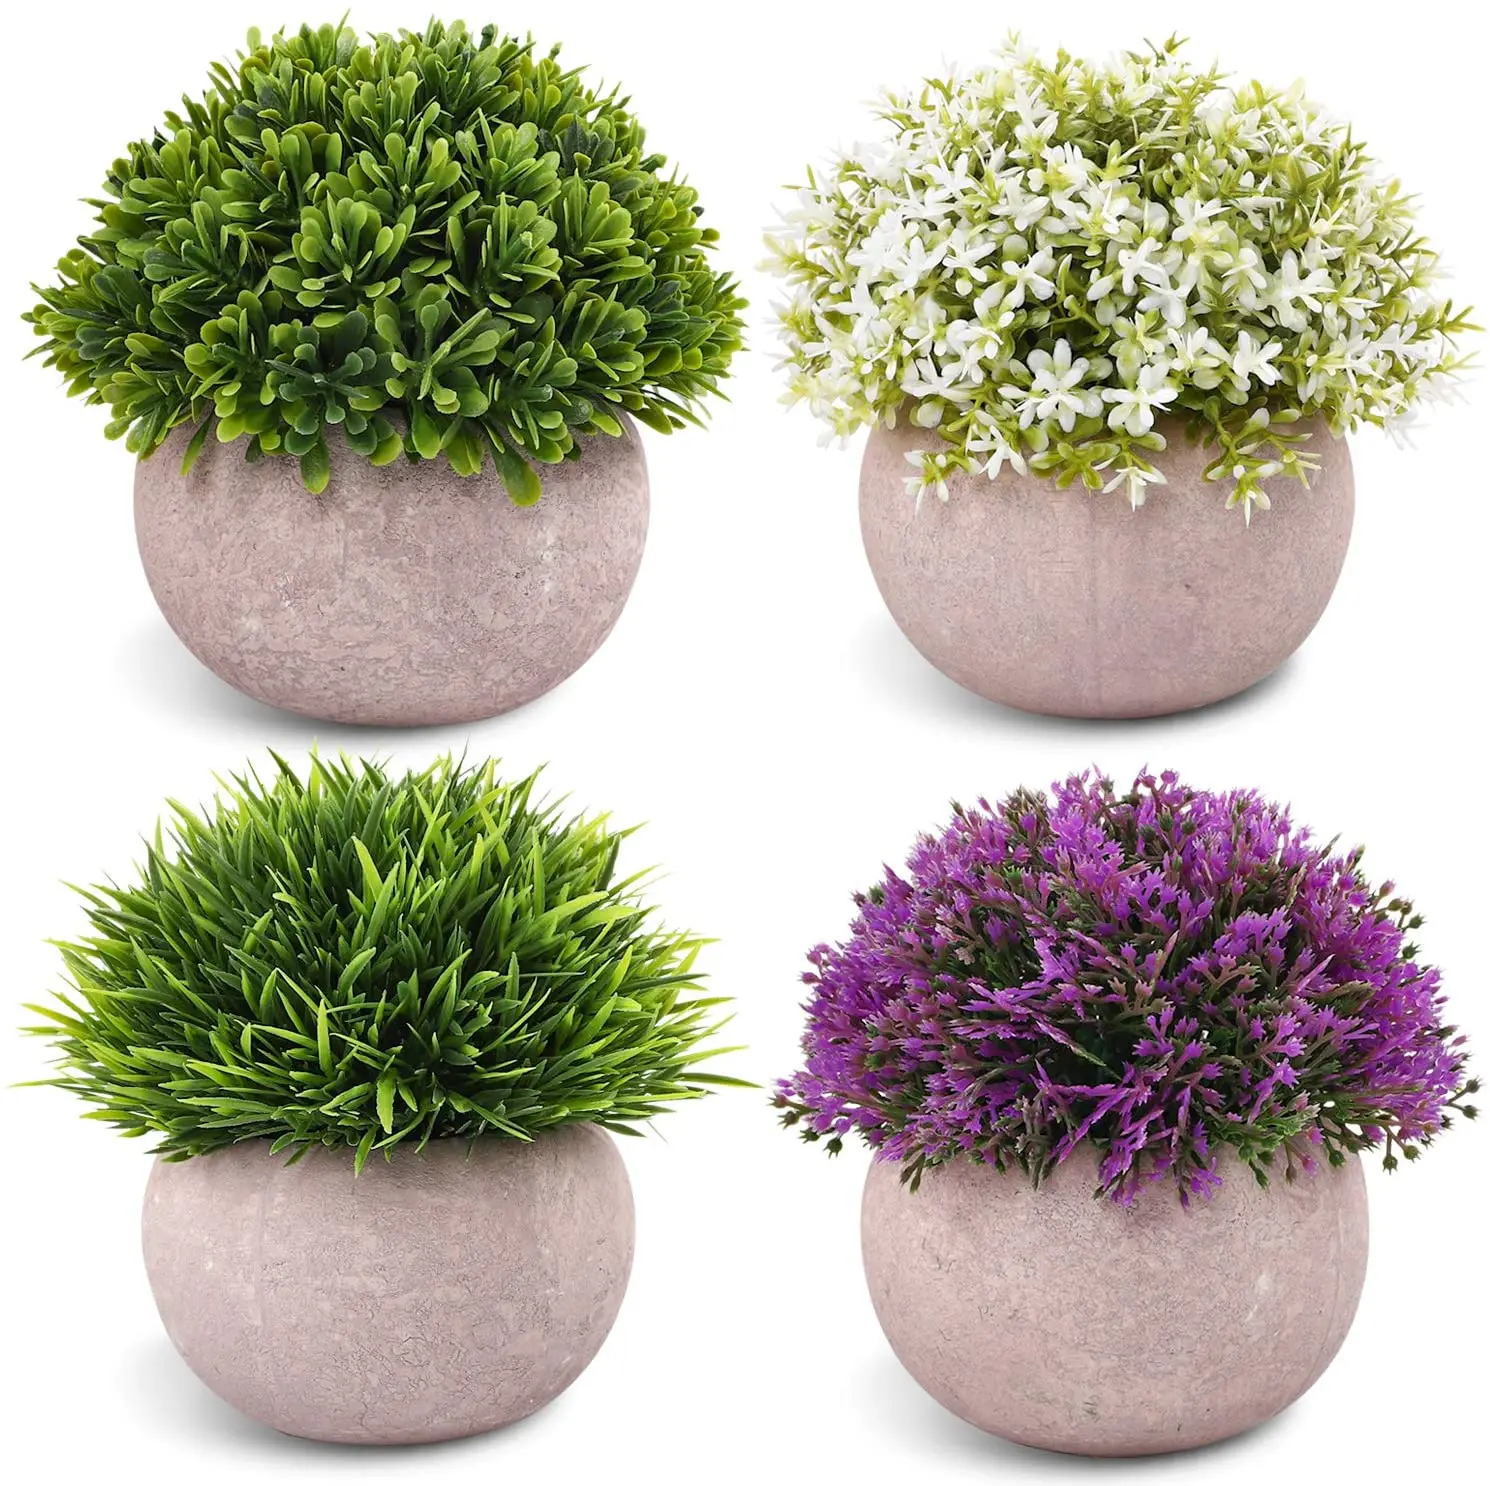 

Hot sale set of 4 artificial grass bonsai mini Artificial Potted Plants natural plant for indoor home decoration, Picture